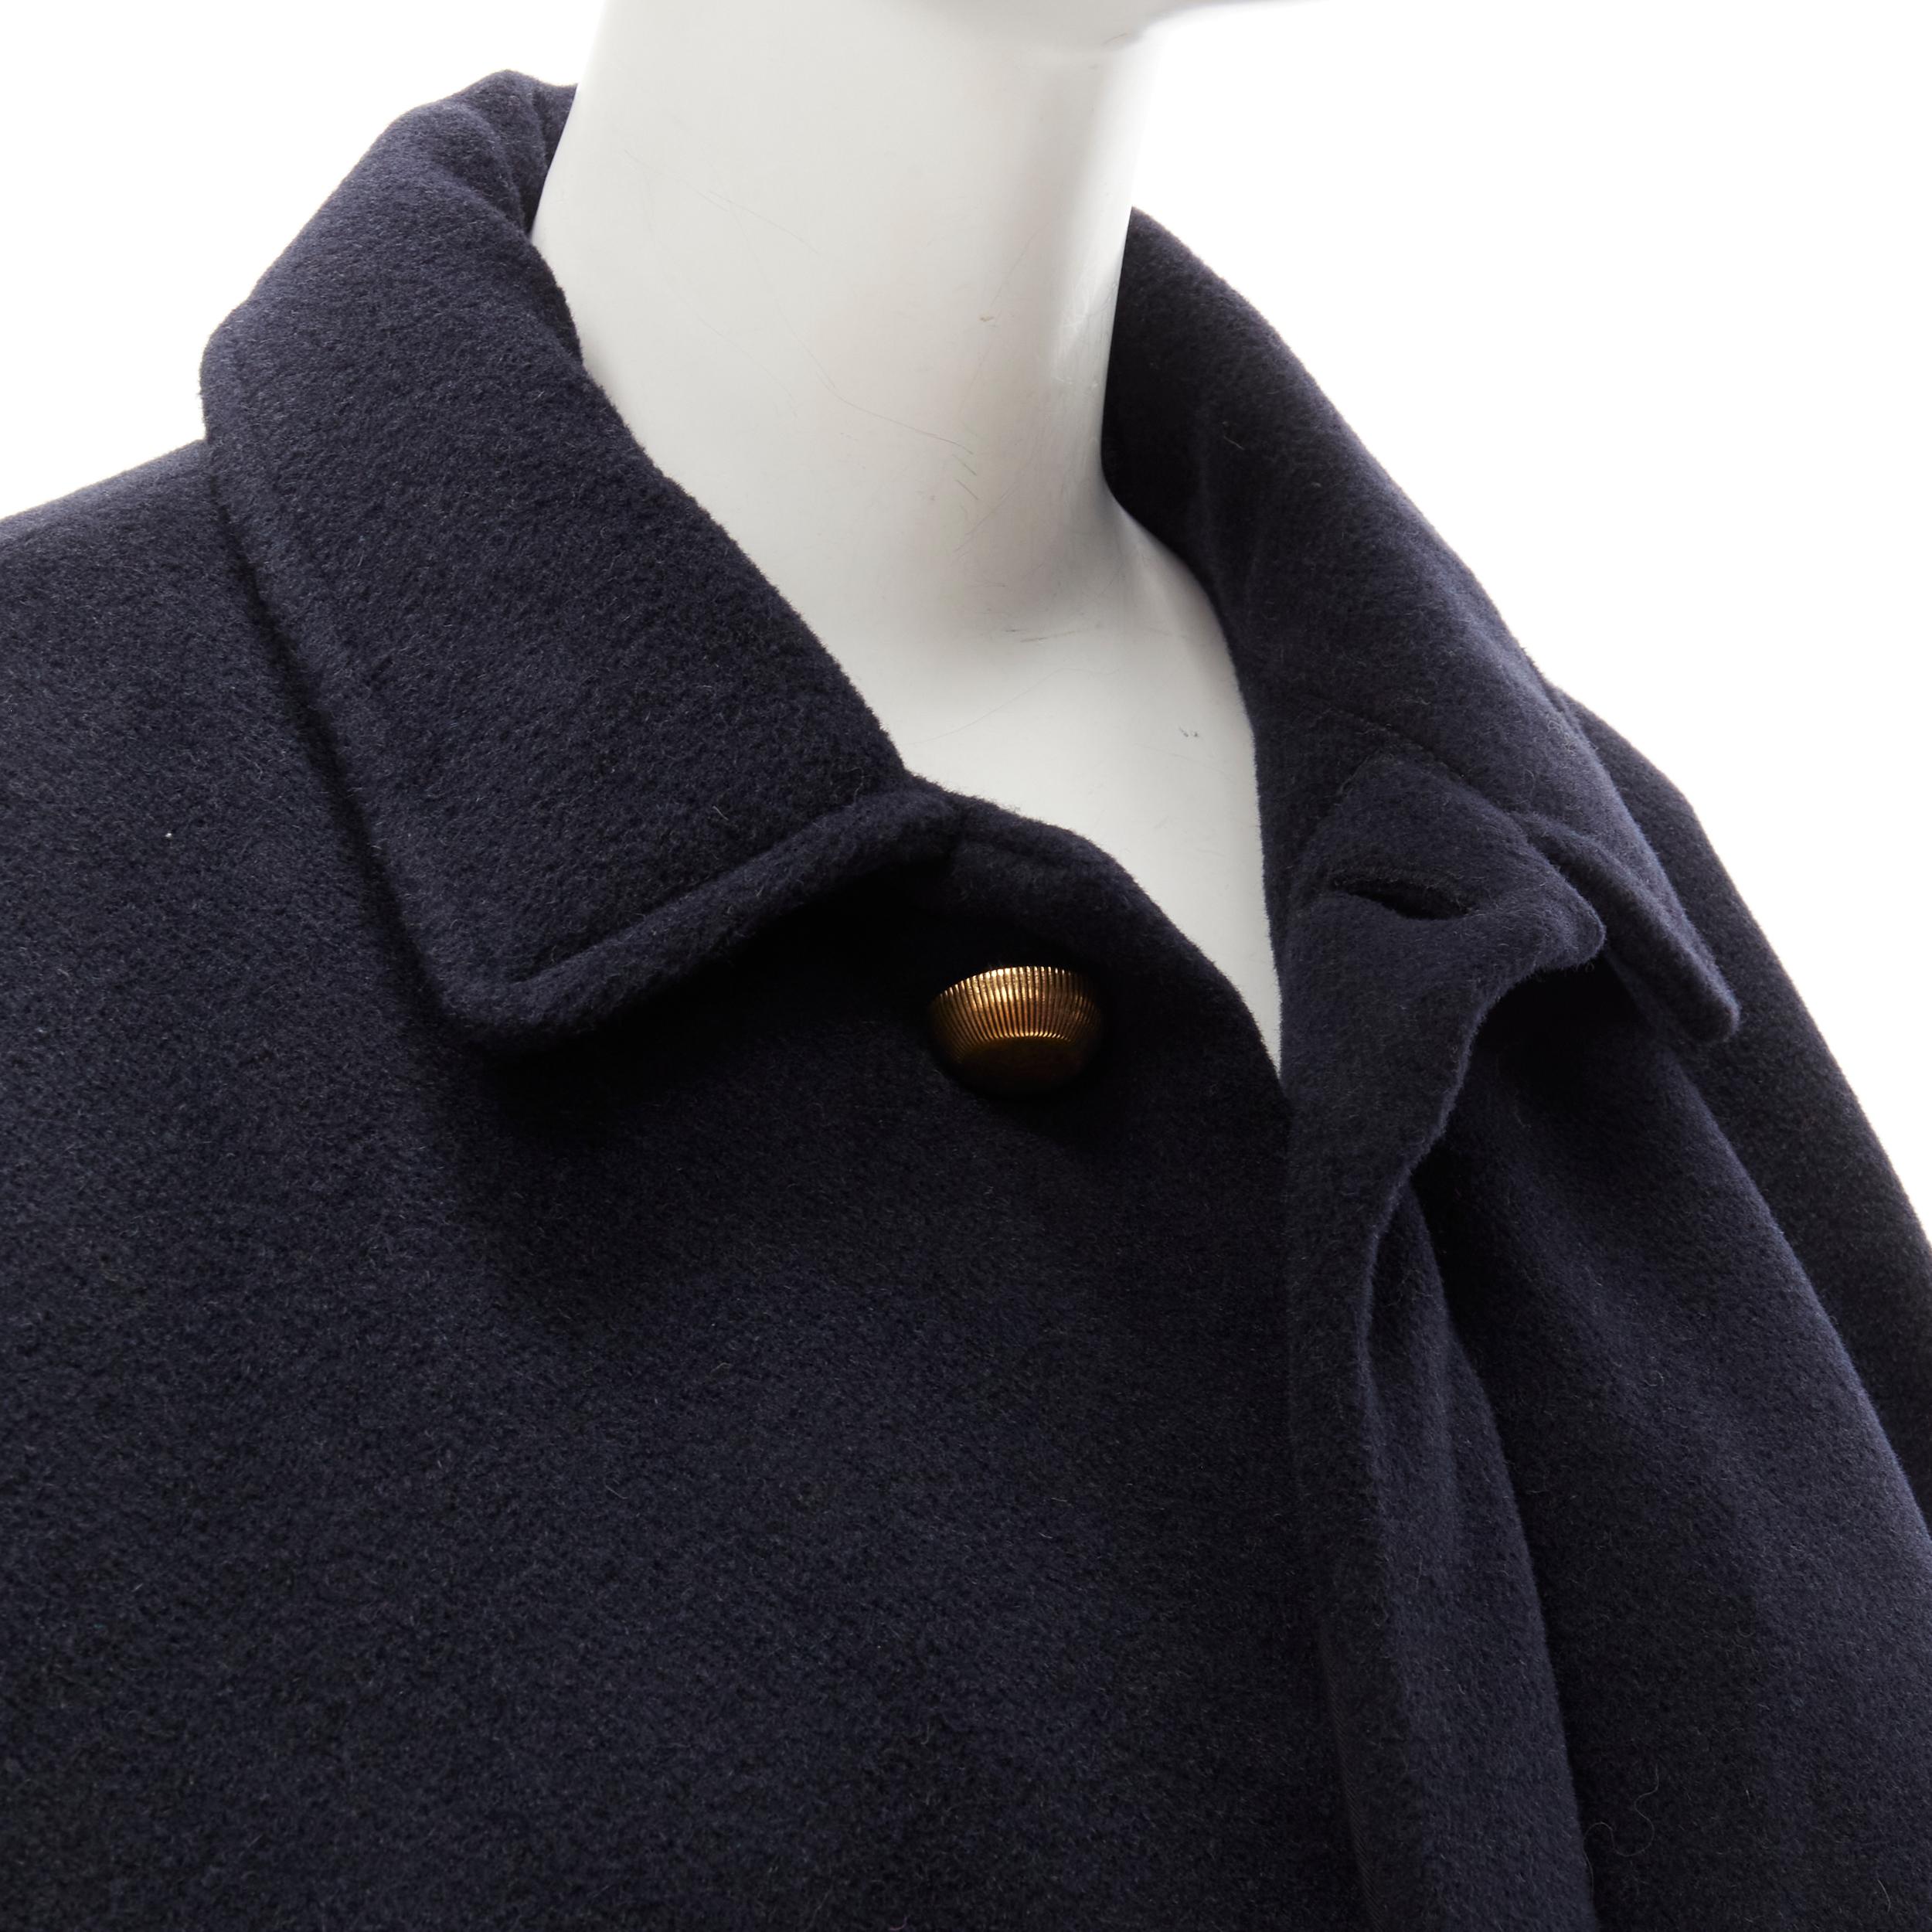 new BALENCIAGA DEMNA 2019 navy camel antique gold button cocoon coat FR38 M
Brand: Balenciaga
Designer: Demna
Collection: 2019 
Material: Camel
Color: Navy
Pattern: Solid
Closure: Button
Extra Detail: Extremely oversized cocoon coat. Navy camel wool